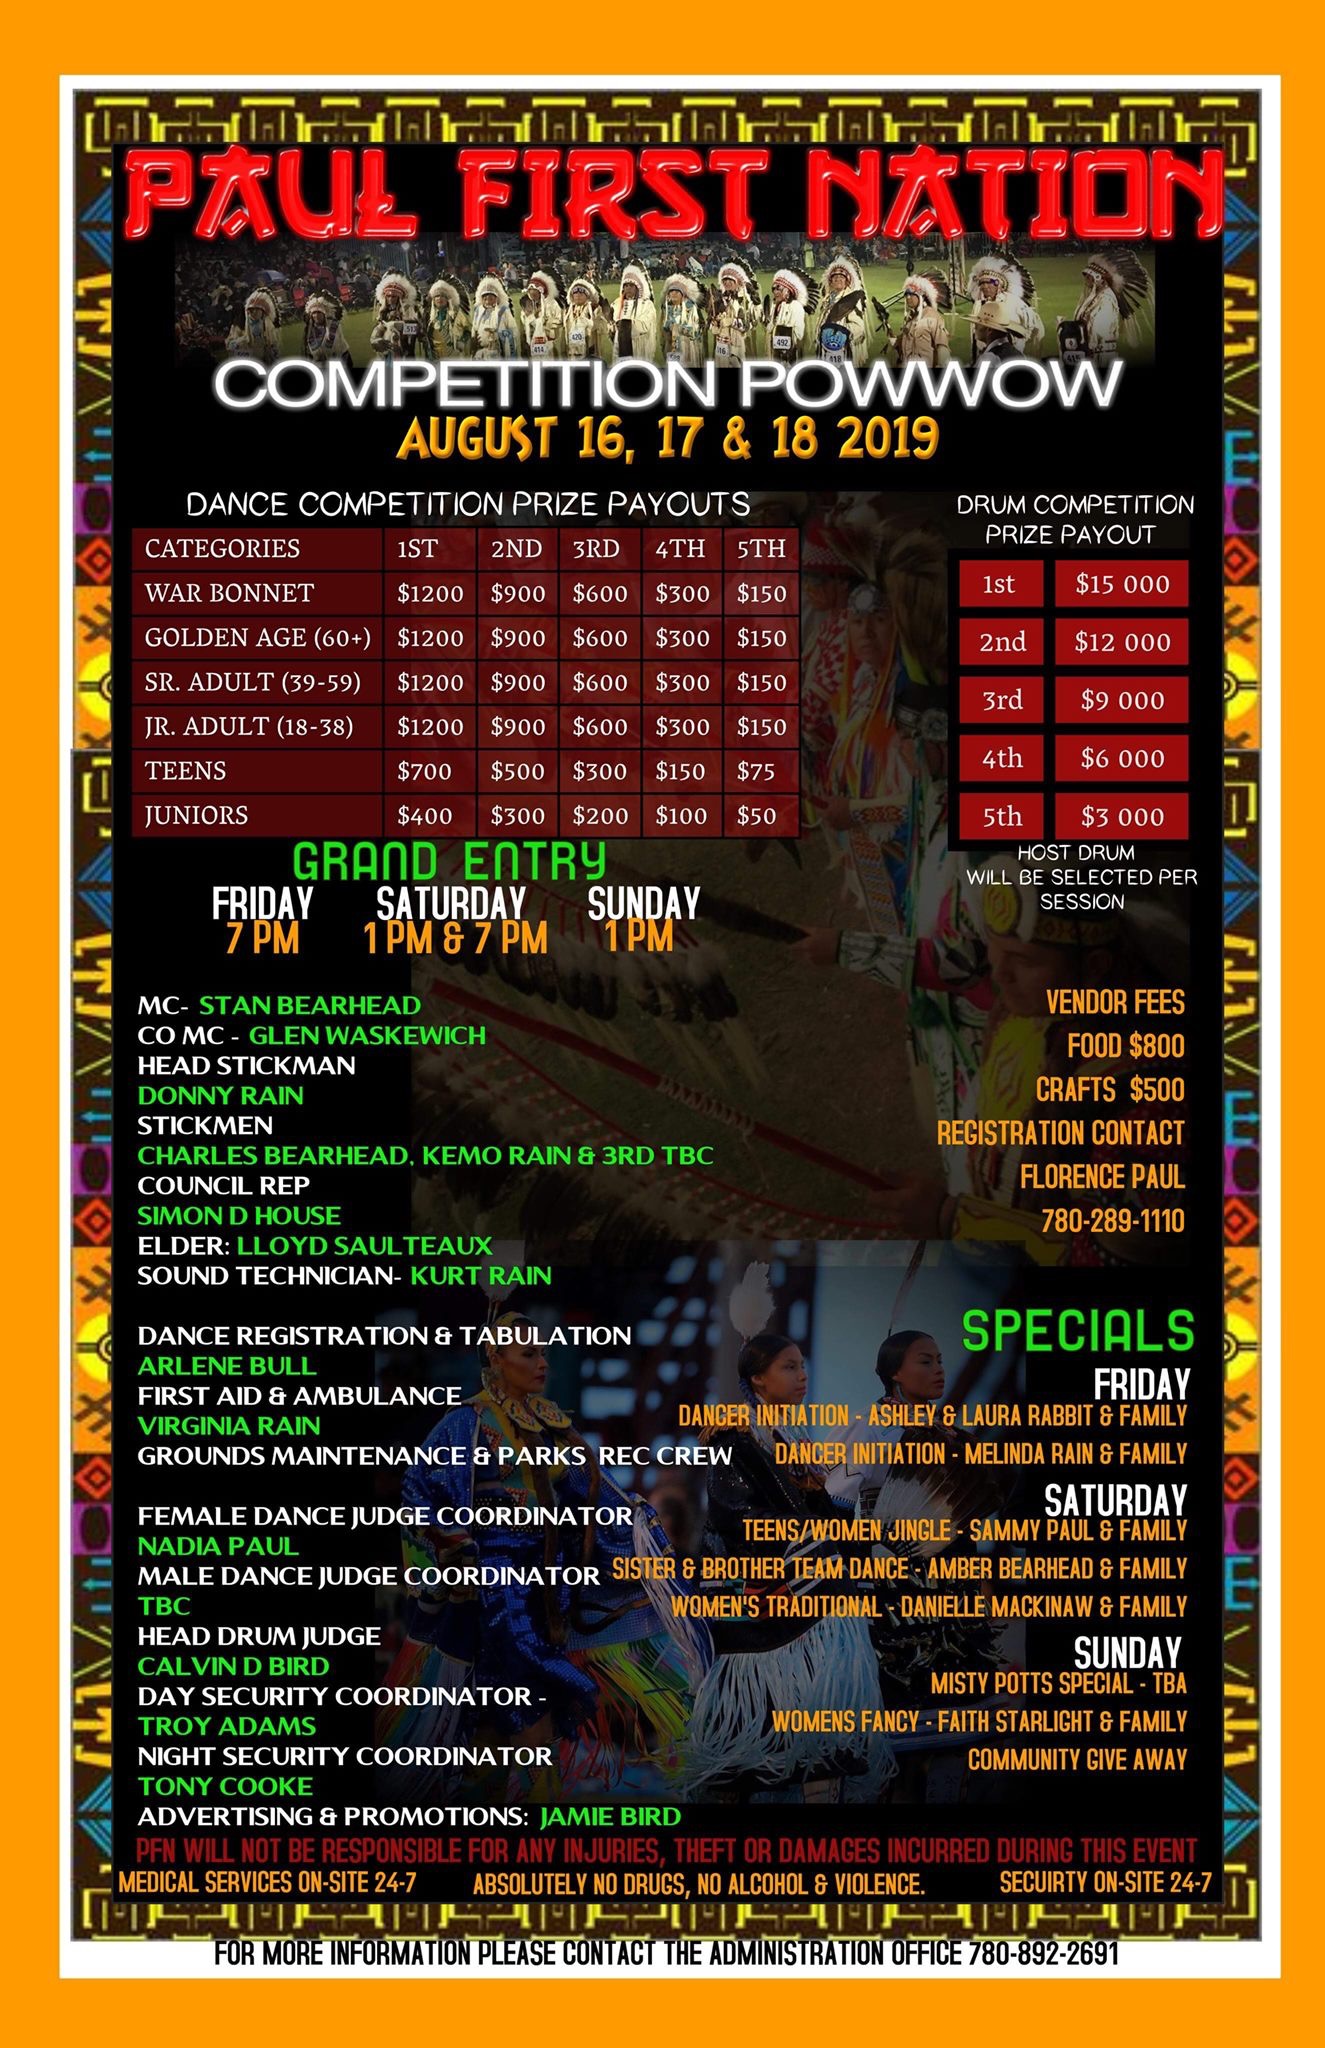 Paul First Nation Competition Powwow 2019